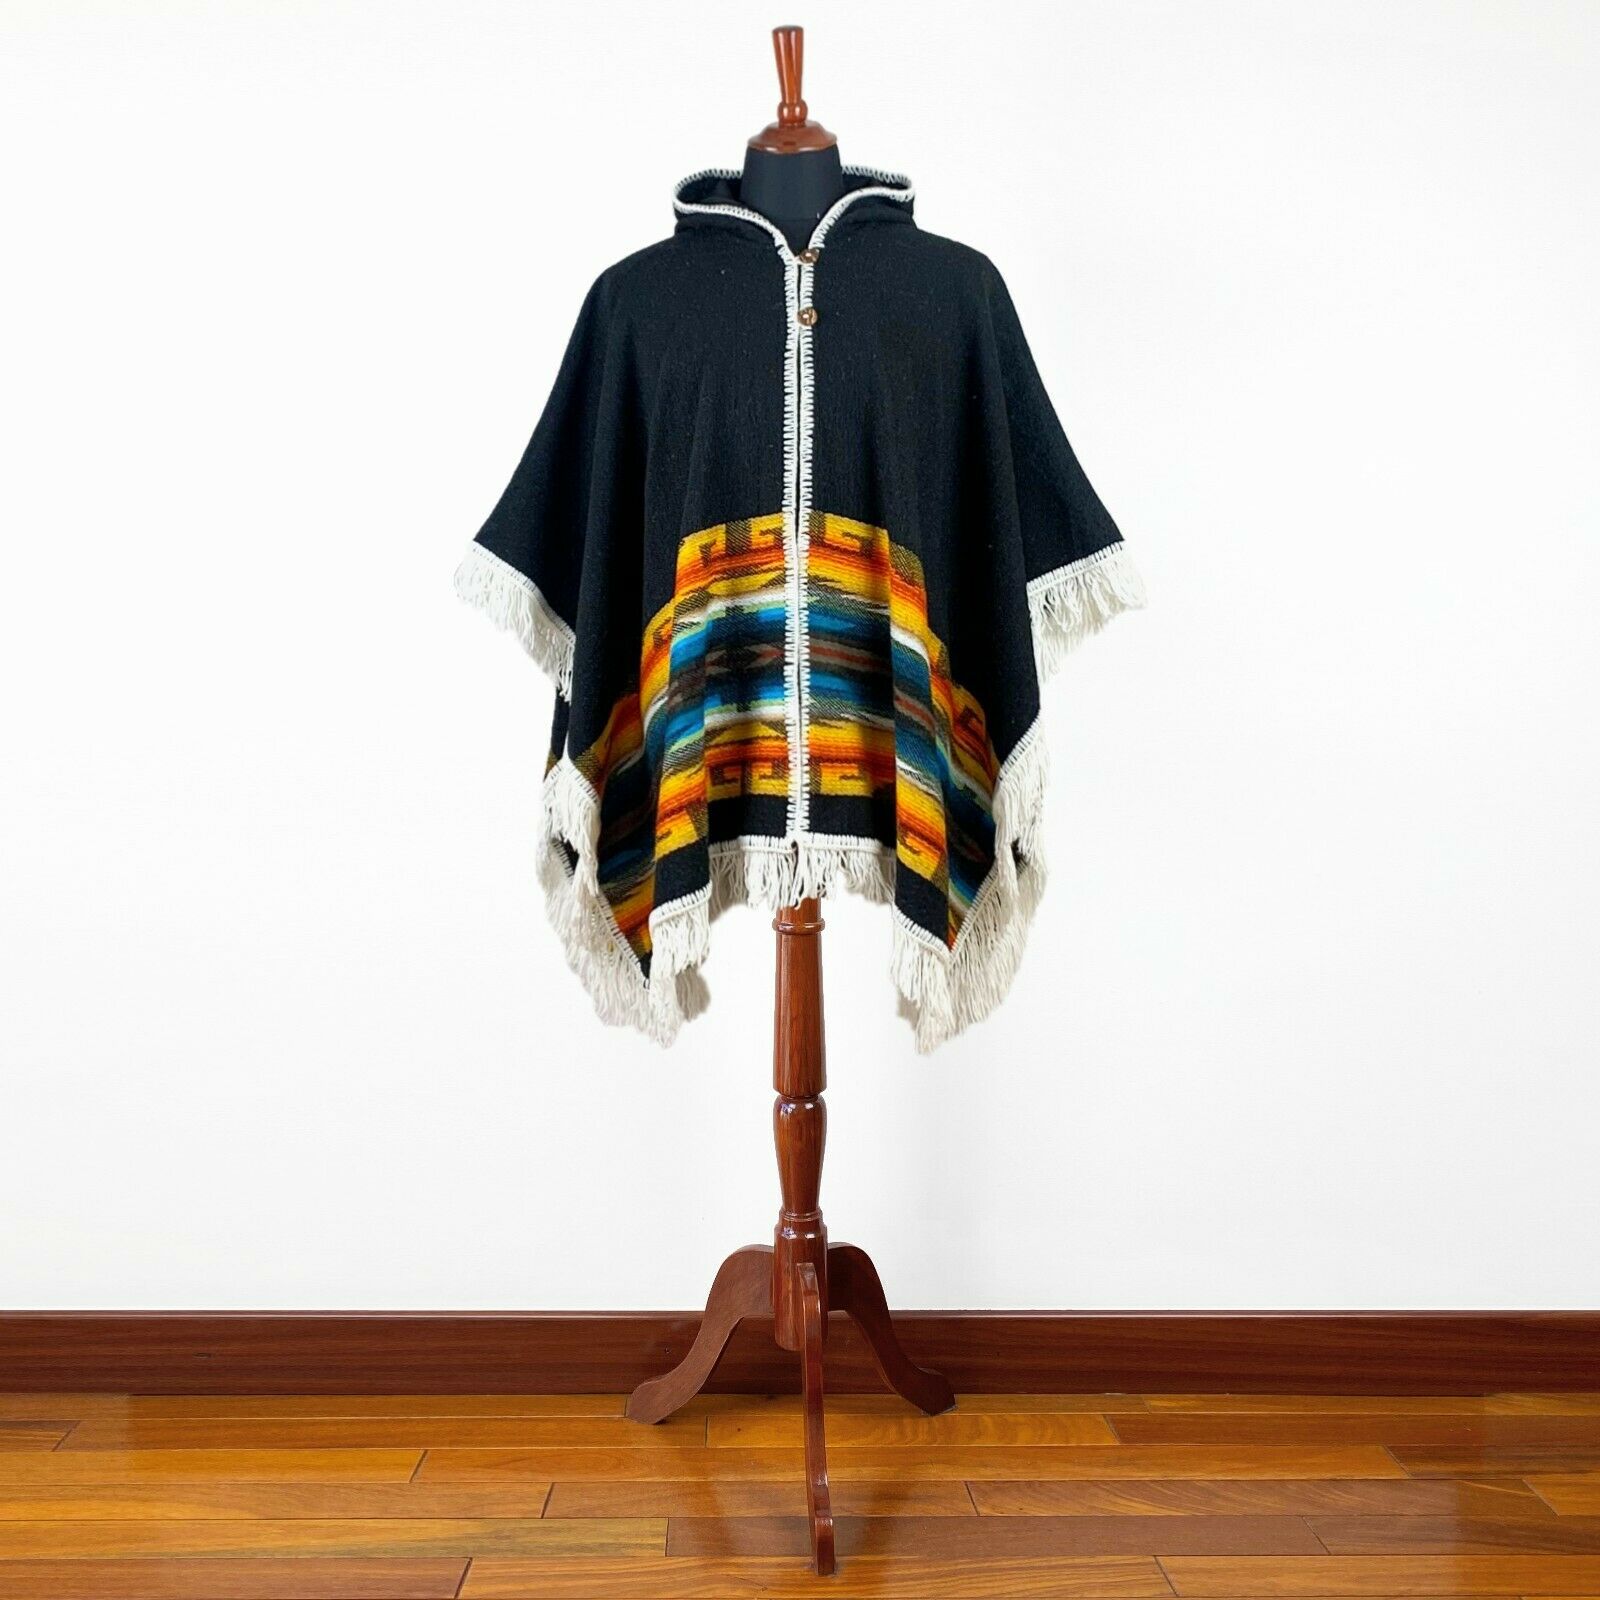 Llama wool Unisex Hooded Open Cape Poncho - Authentic South American Aztec pattern - BLACK